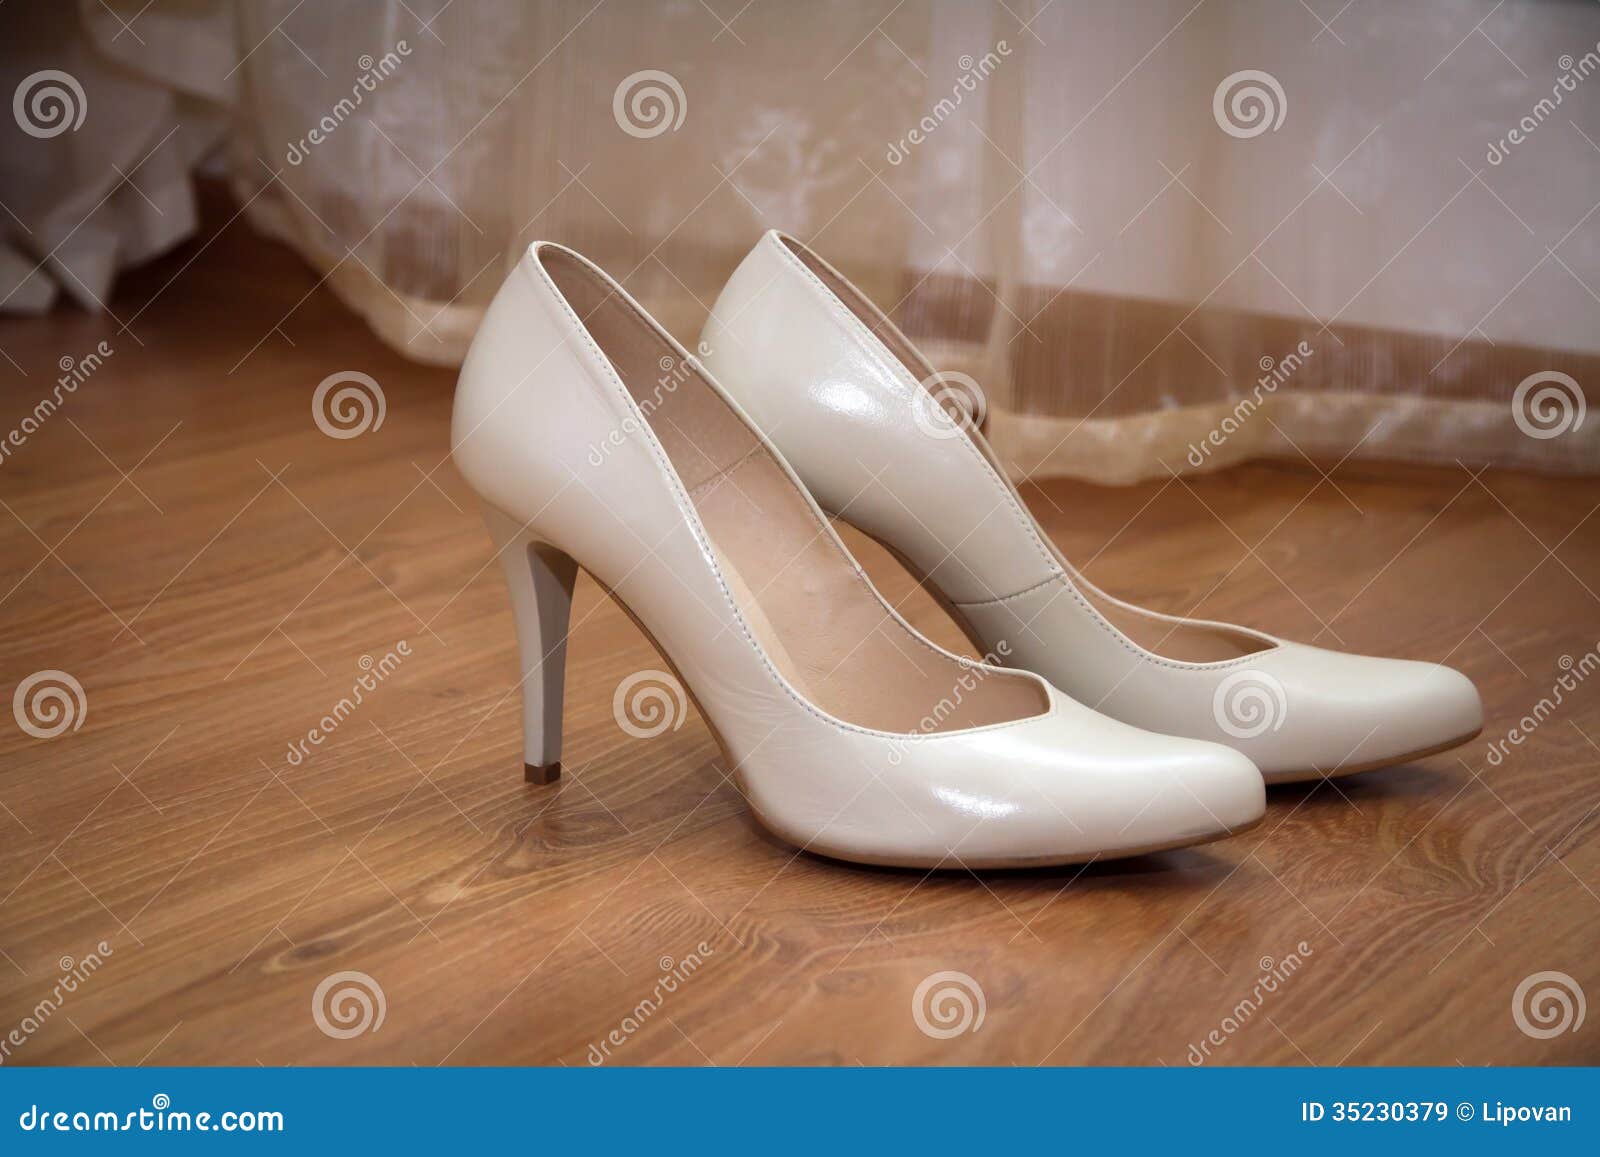 A Pair Of Pale Creamcolored Wedding Women's Shoes Royalty